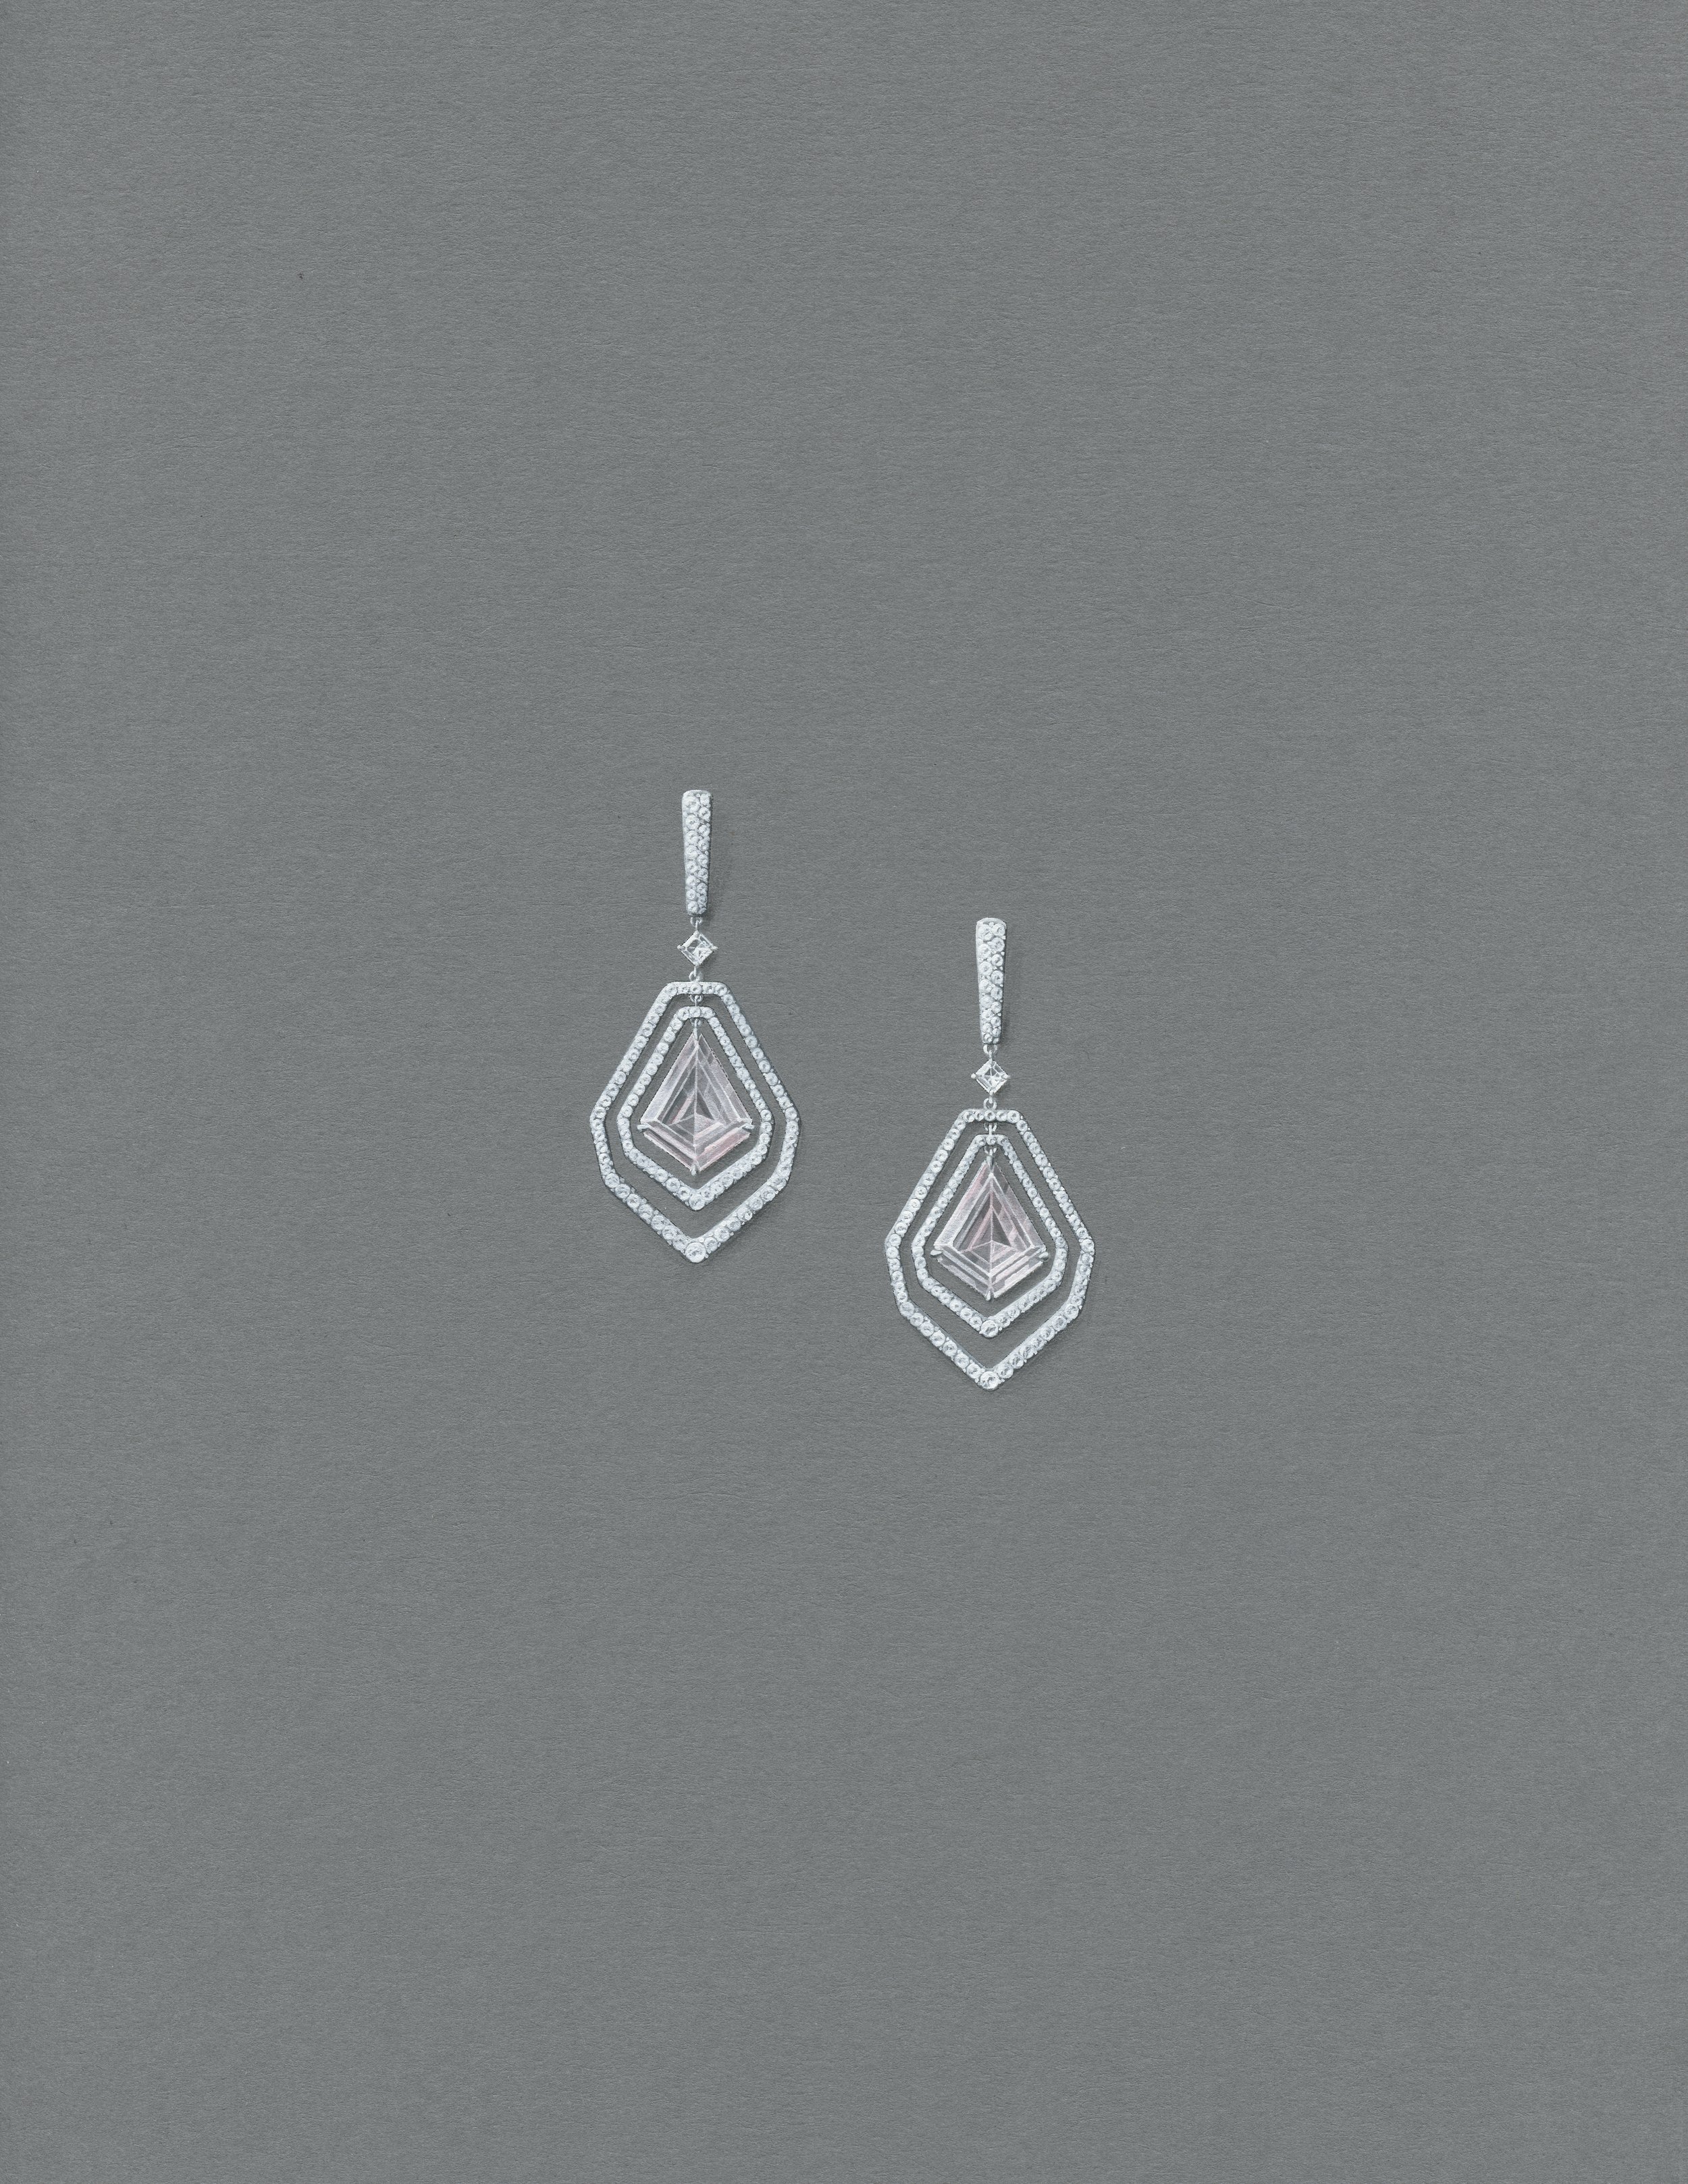  Gouache painting of a pair of earrings with morganite and white diamonds, set in titanium. 